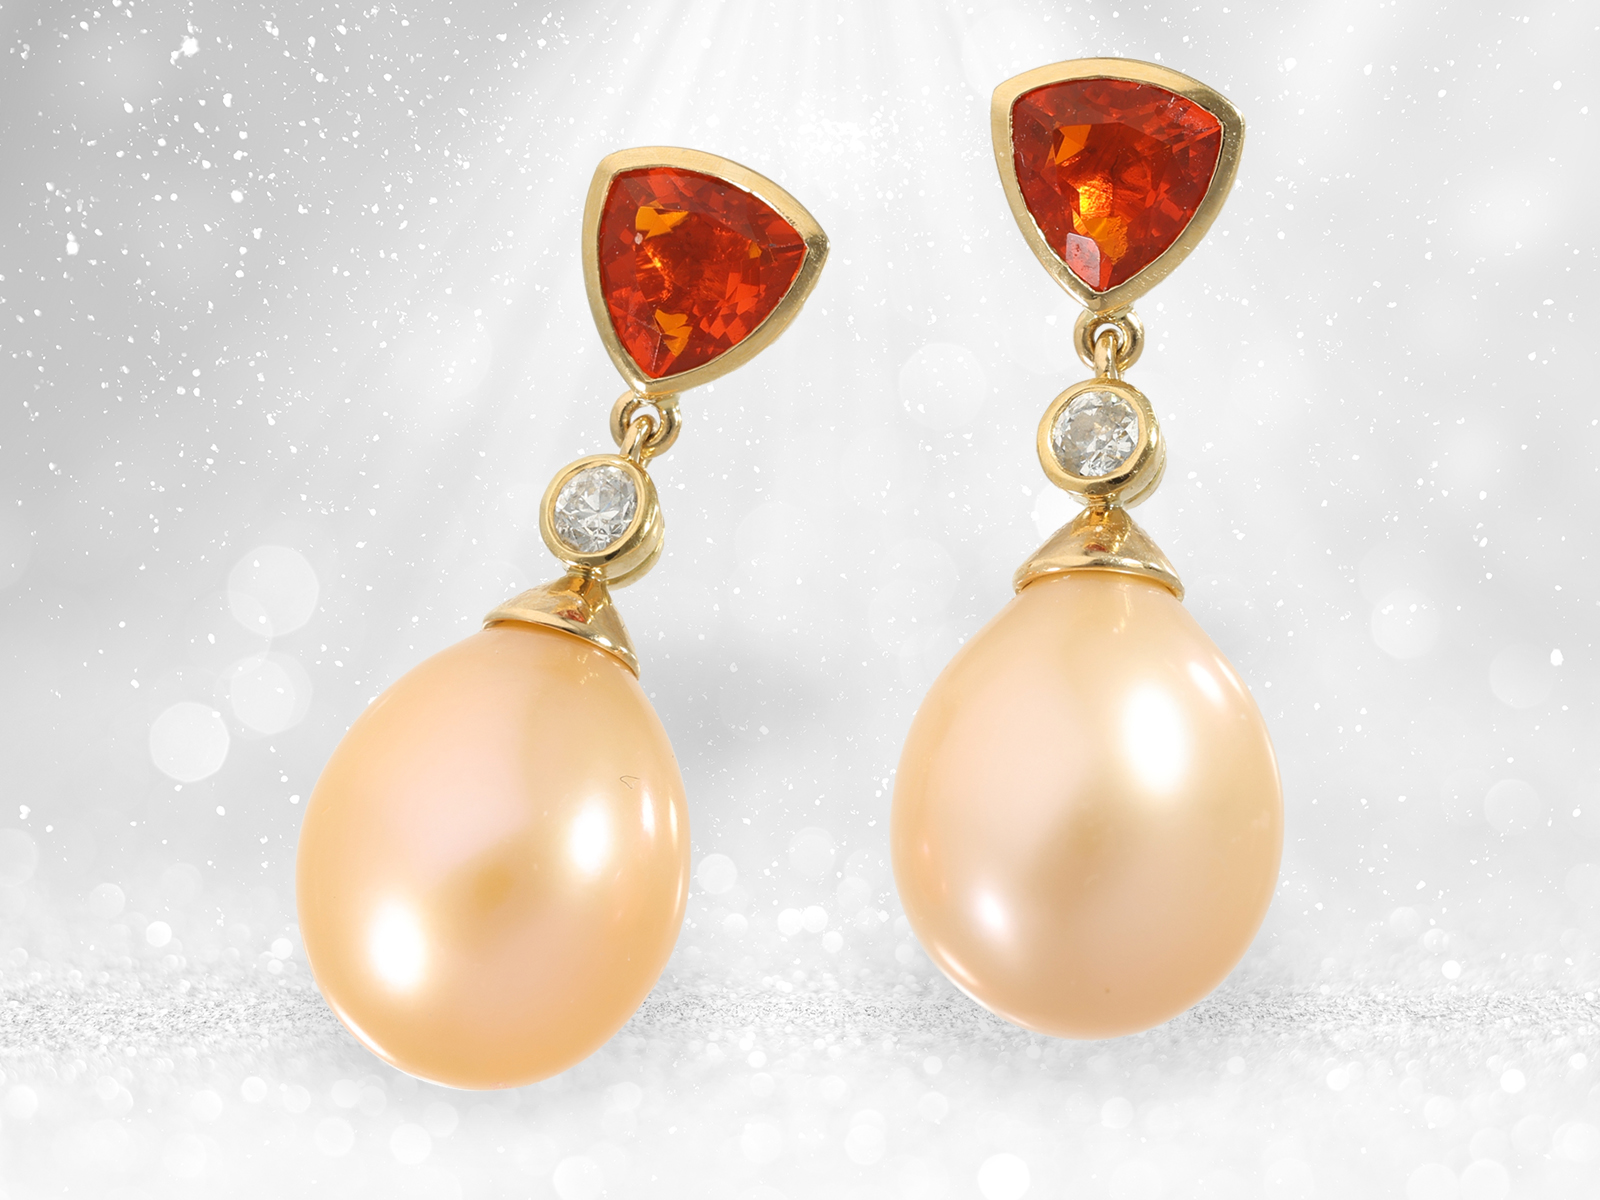 High quality ear studs with fire opal, brilliant-cut diamonds and cultured pearls, 18K gold handcraf - Image 2 of 3